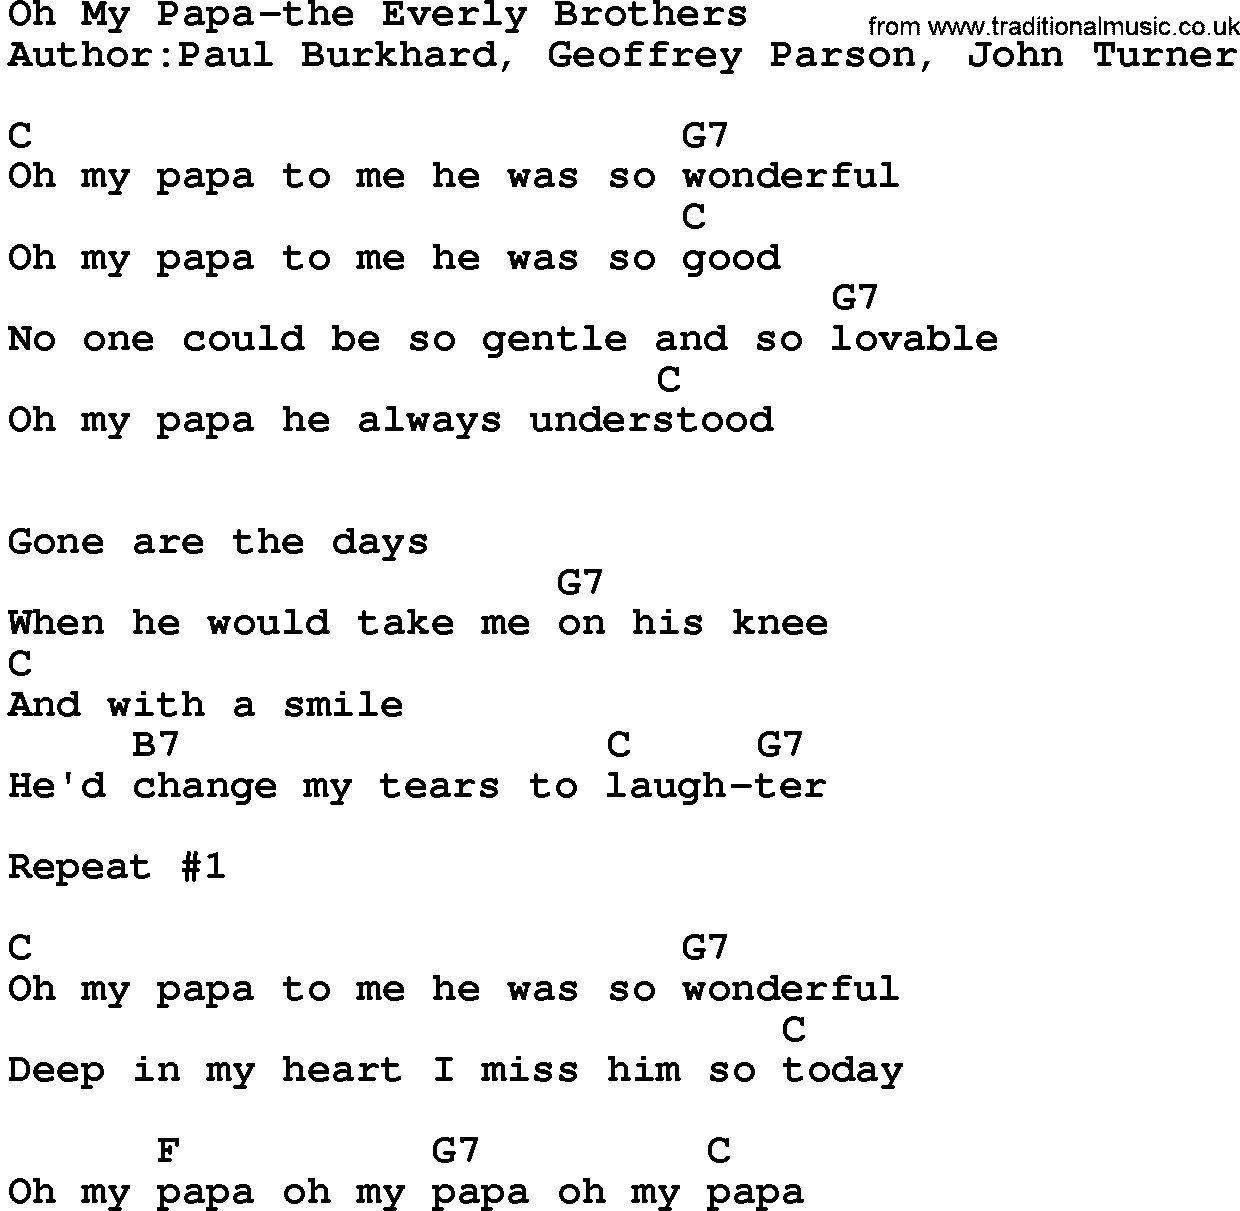 Country music song: Oh My Papa-The Everly Brothers lyrics and chords